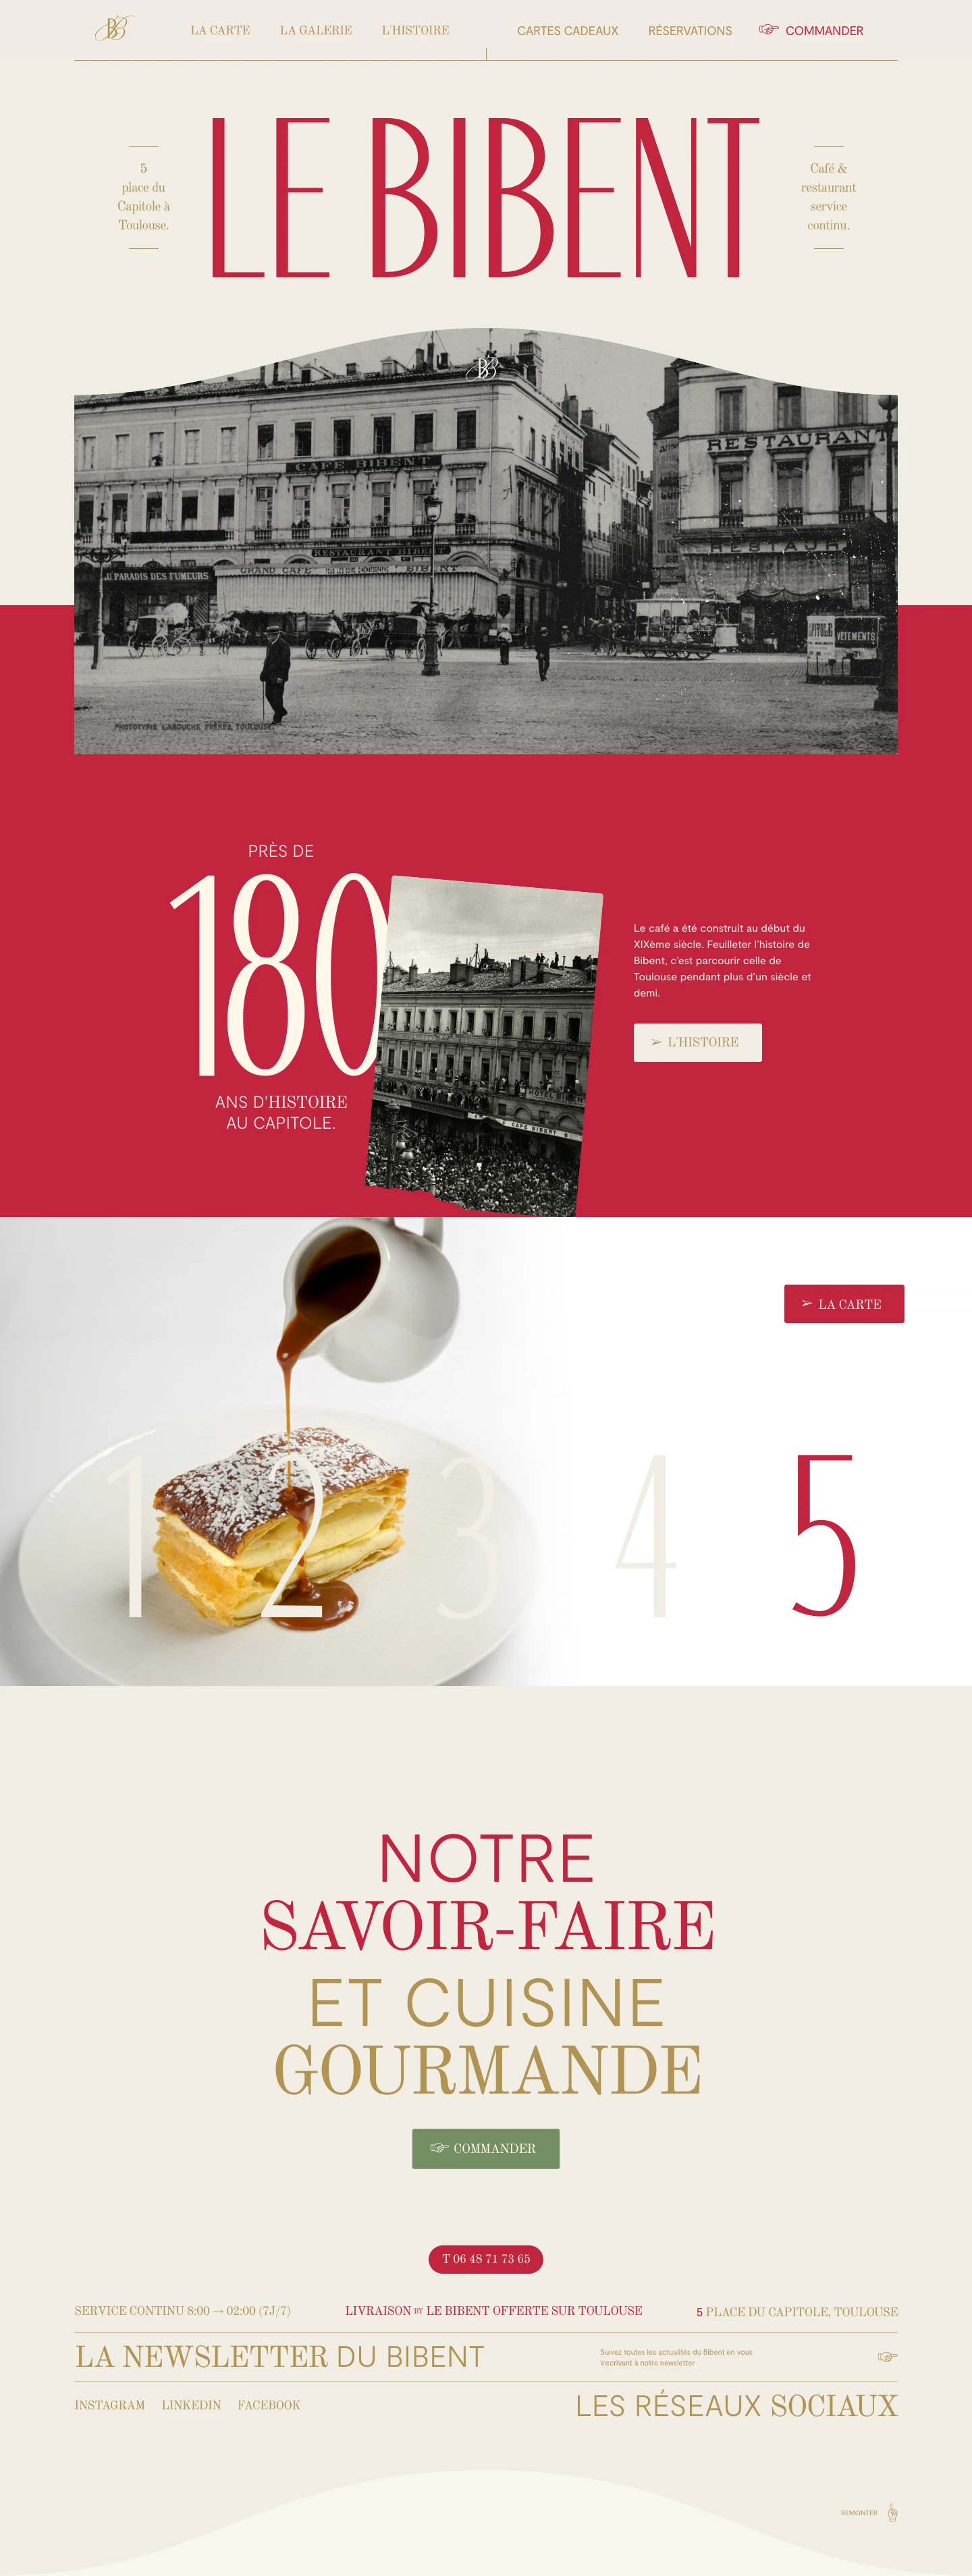 Le Bibent Landing Page Example: Café & restaurant continuous service. The café was built at the beginning of the 19th century. To leaf through the history of Bibent is to explore that of Toulouse for more than a century and a half.